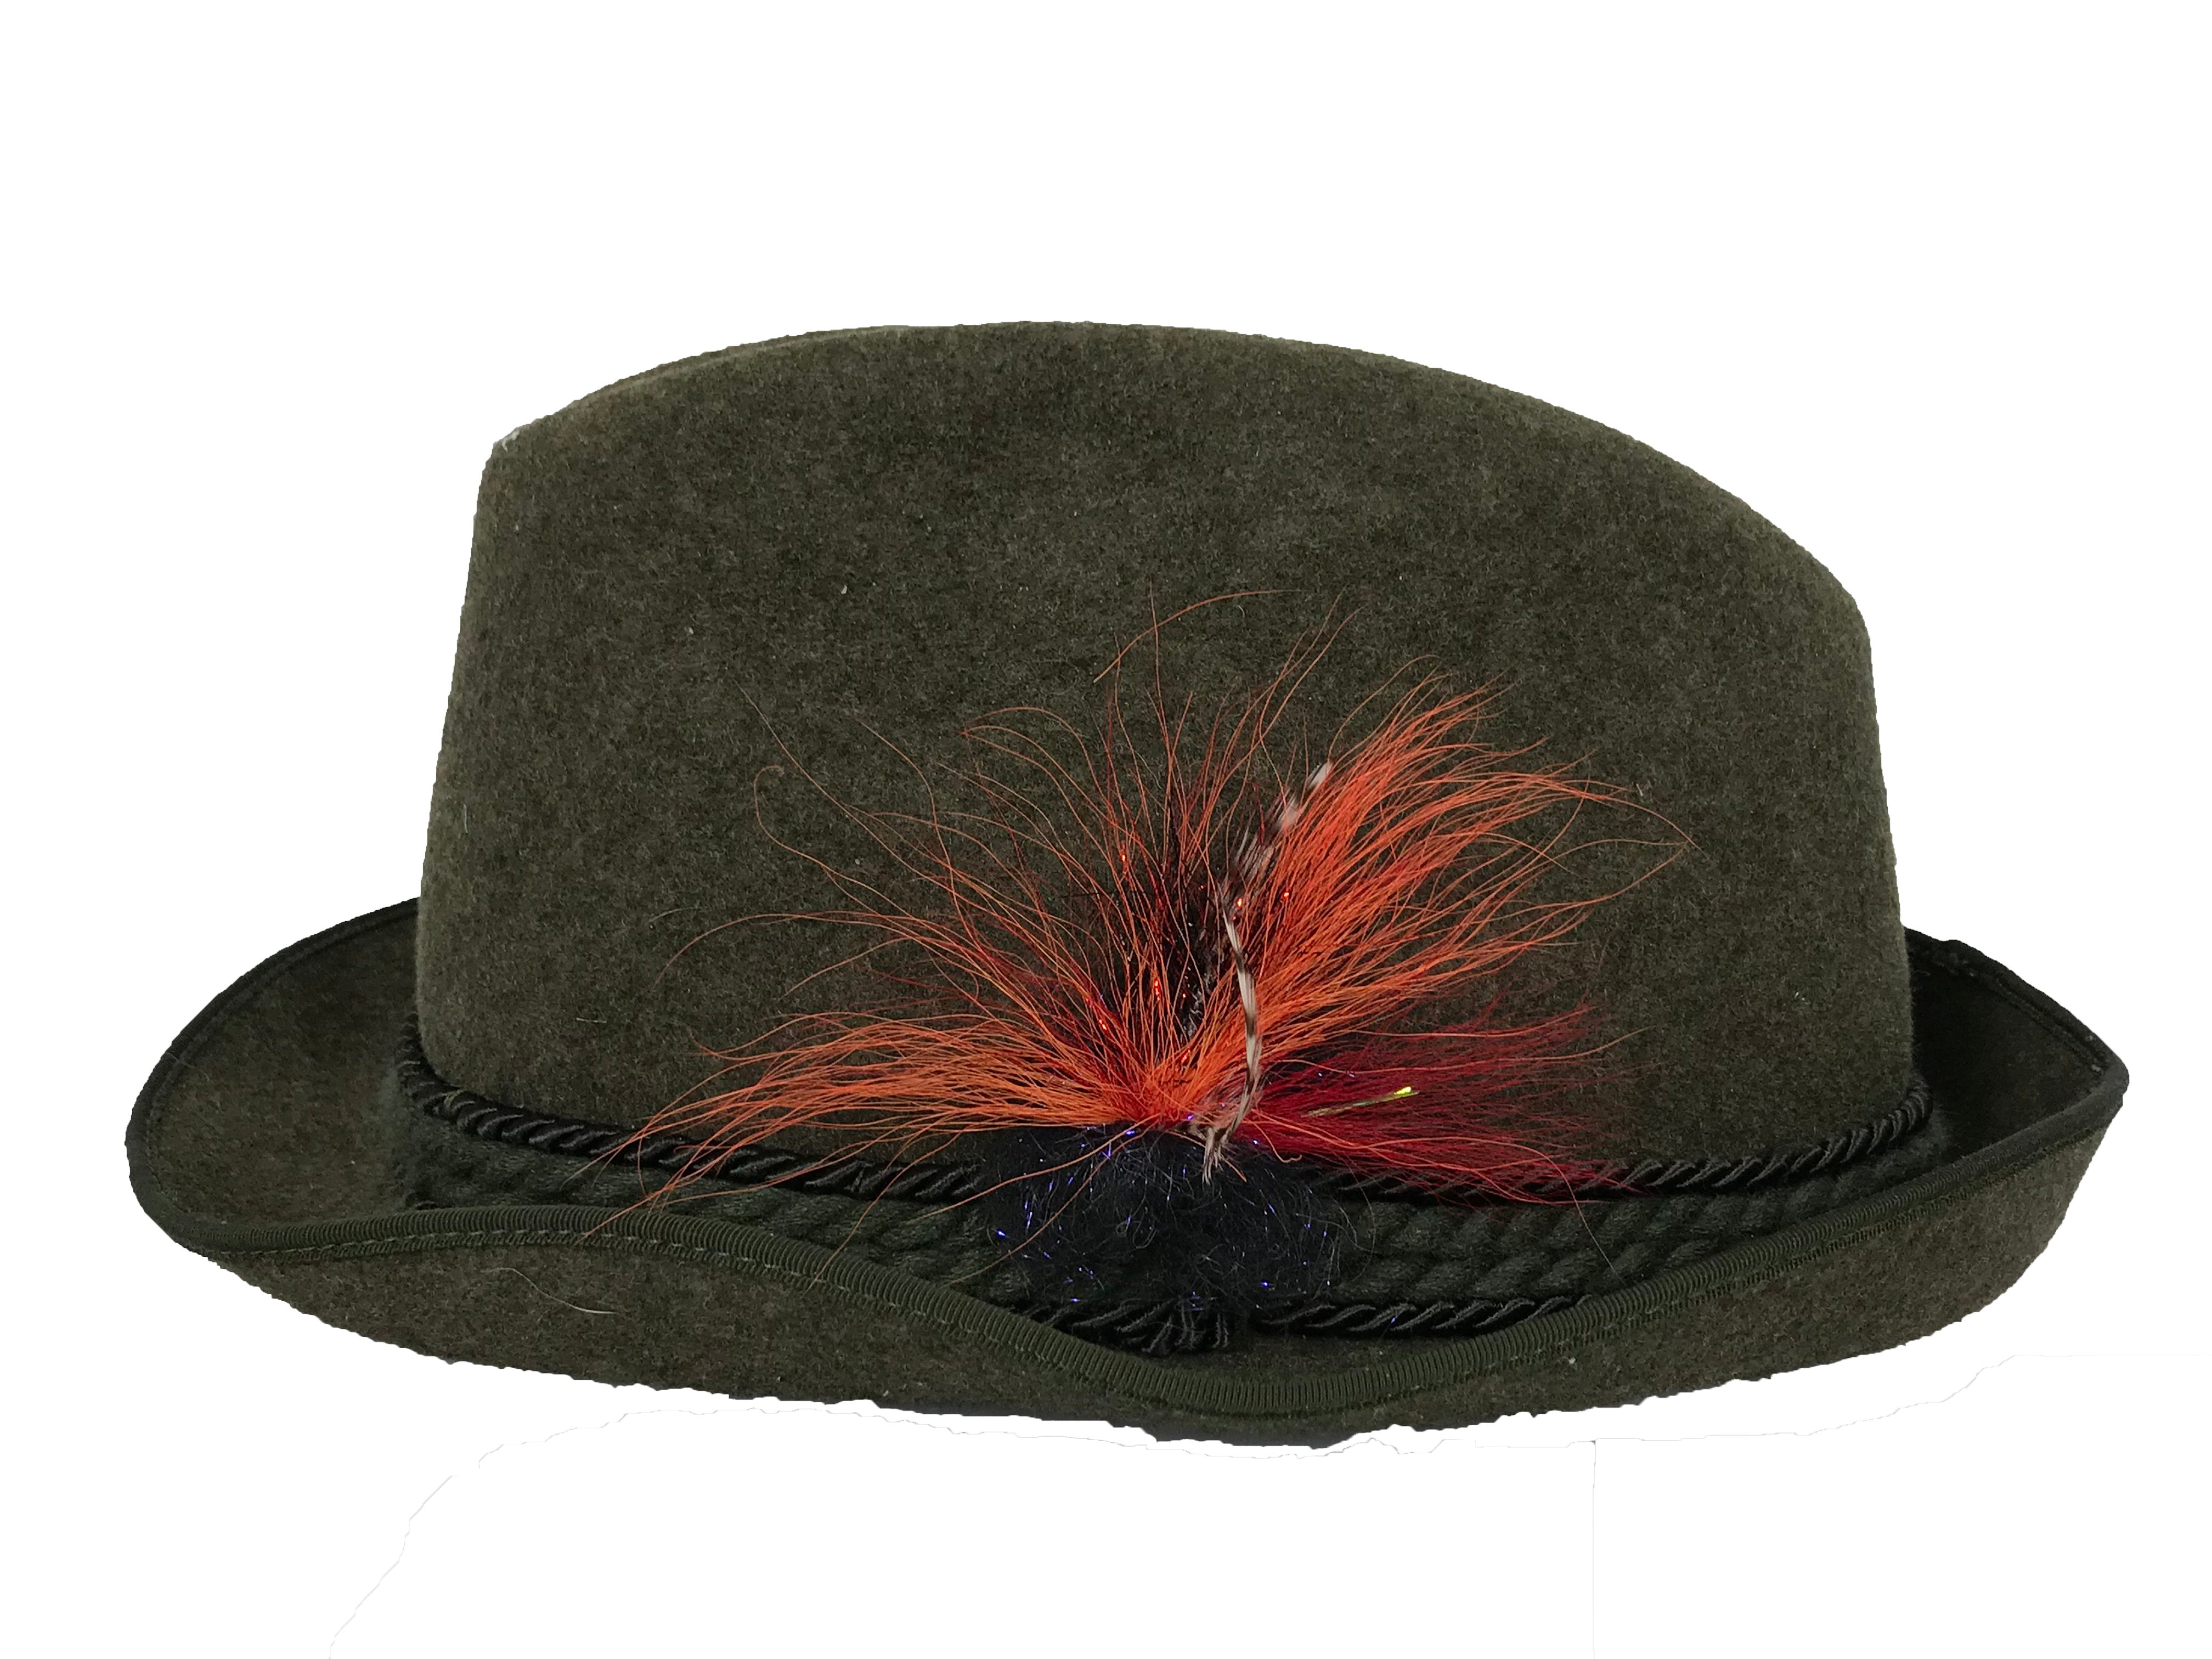 Lodenhut Green Wool Hat with Feather Detail Size 7 1/4